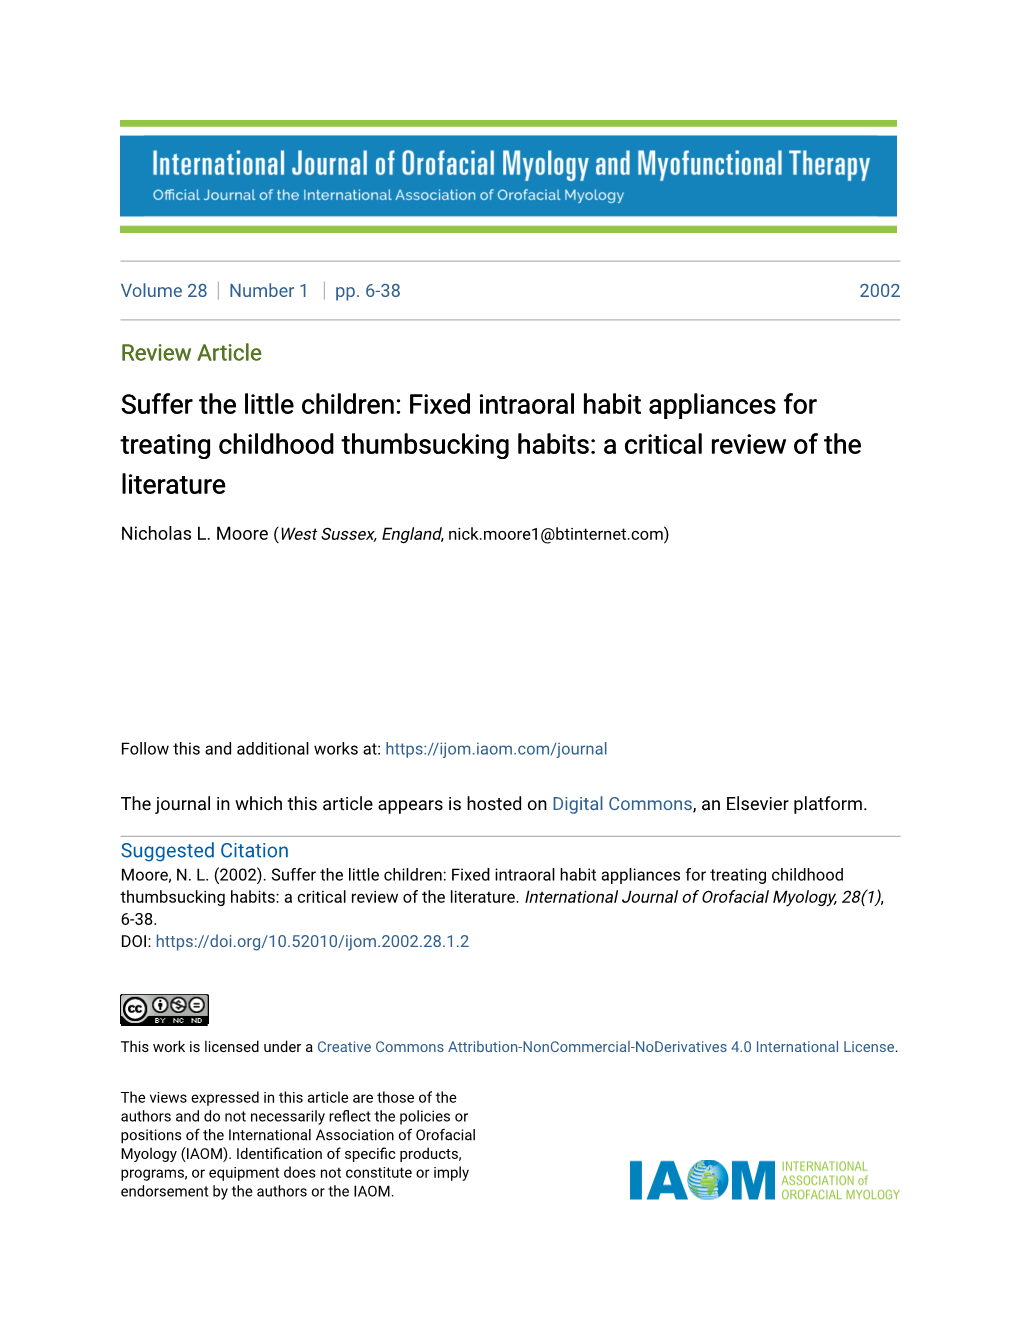 Fixed Intraoral Habit Appliances for Treating Childhood Thumbsucking Habits: a Critical Review of the Literature